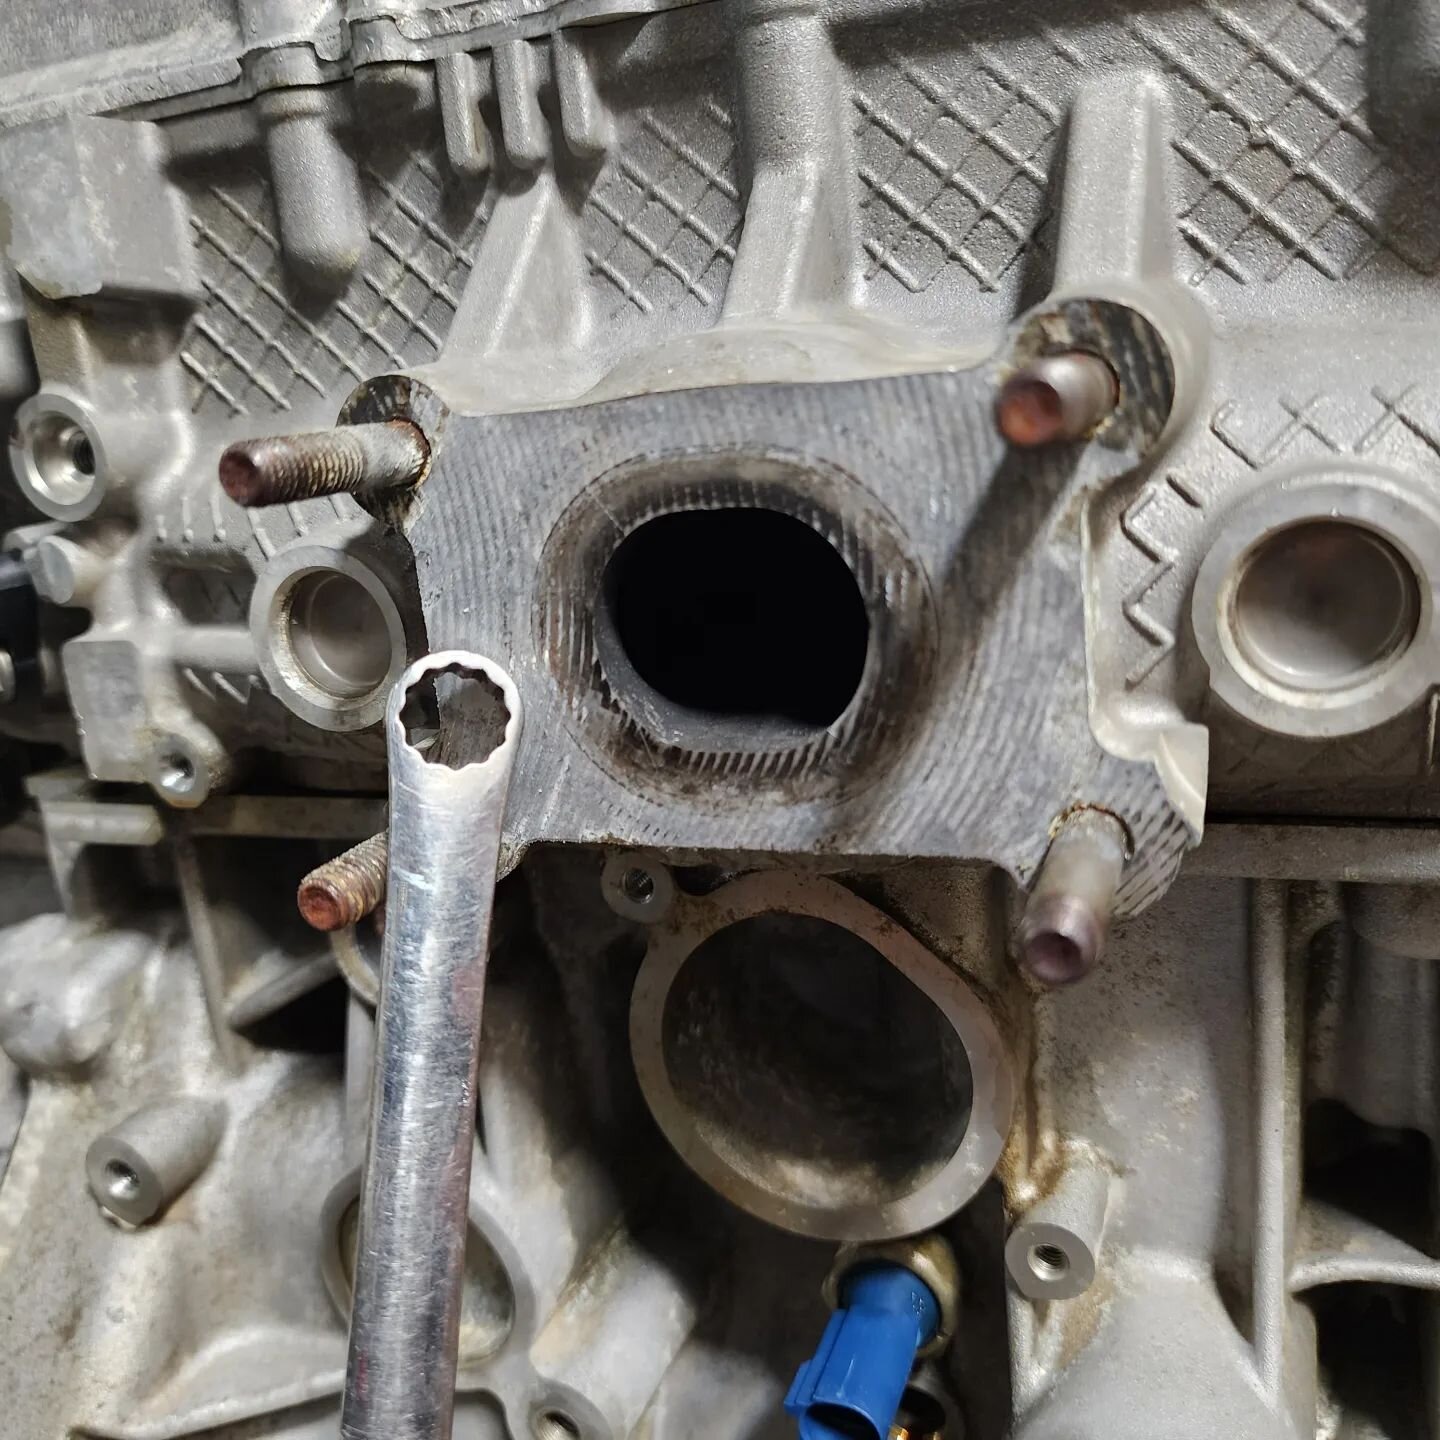 Look at this baby exhaust port! 12mm wrench for scale. This is on a Volkswagen 1.4 Turbo. 

#Volkswagen #turbo #turbocharger #turbocharging #engineering #enginedesign #mechanicsmemes